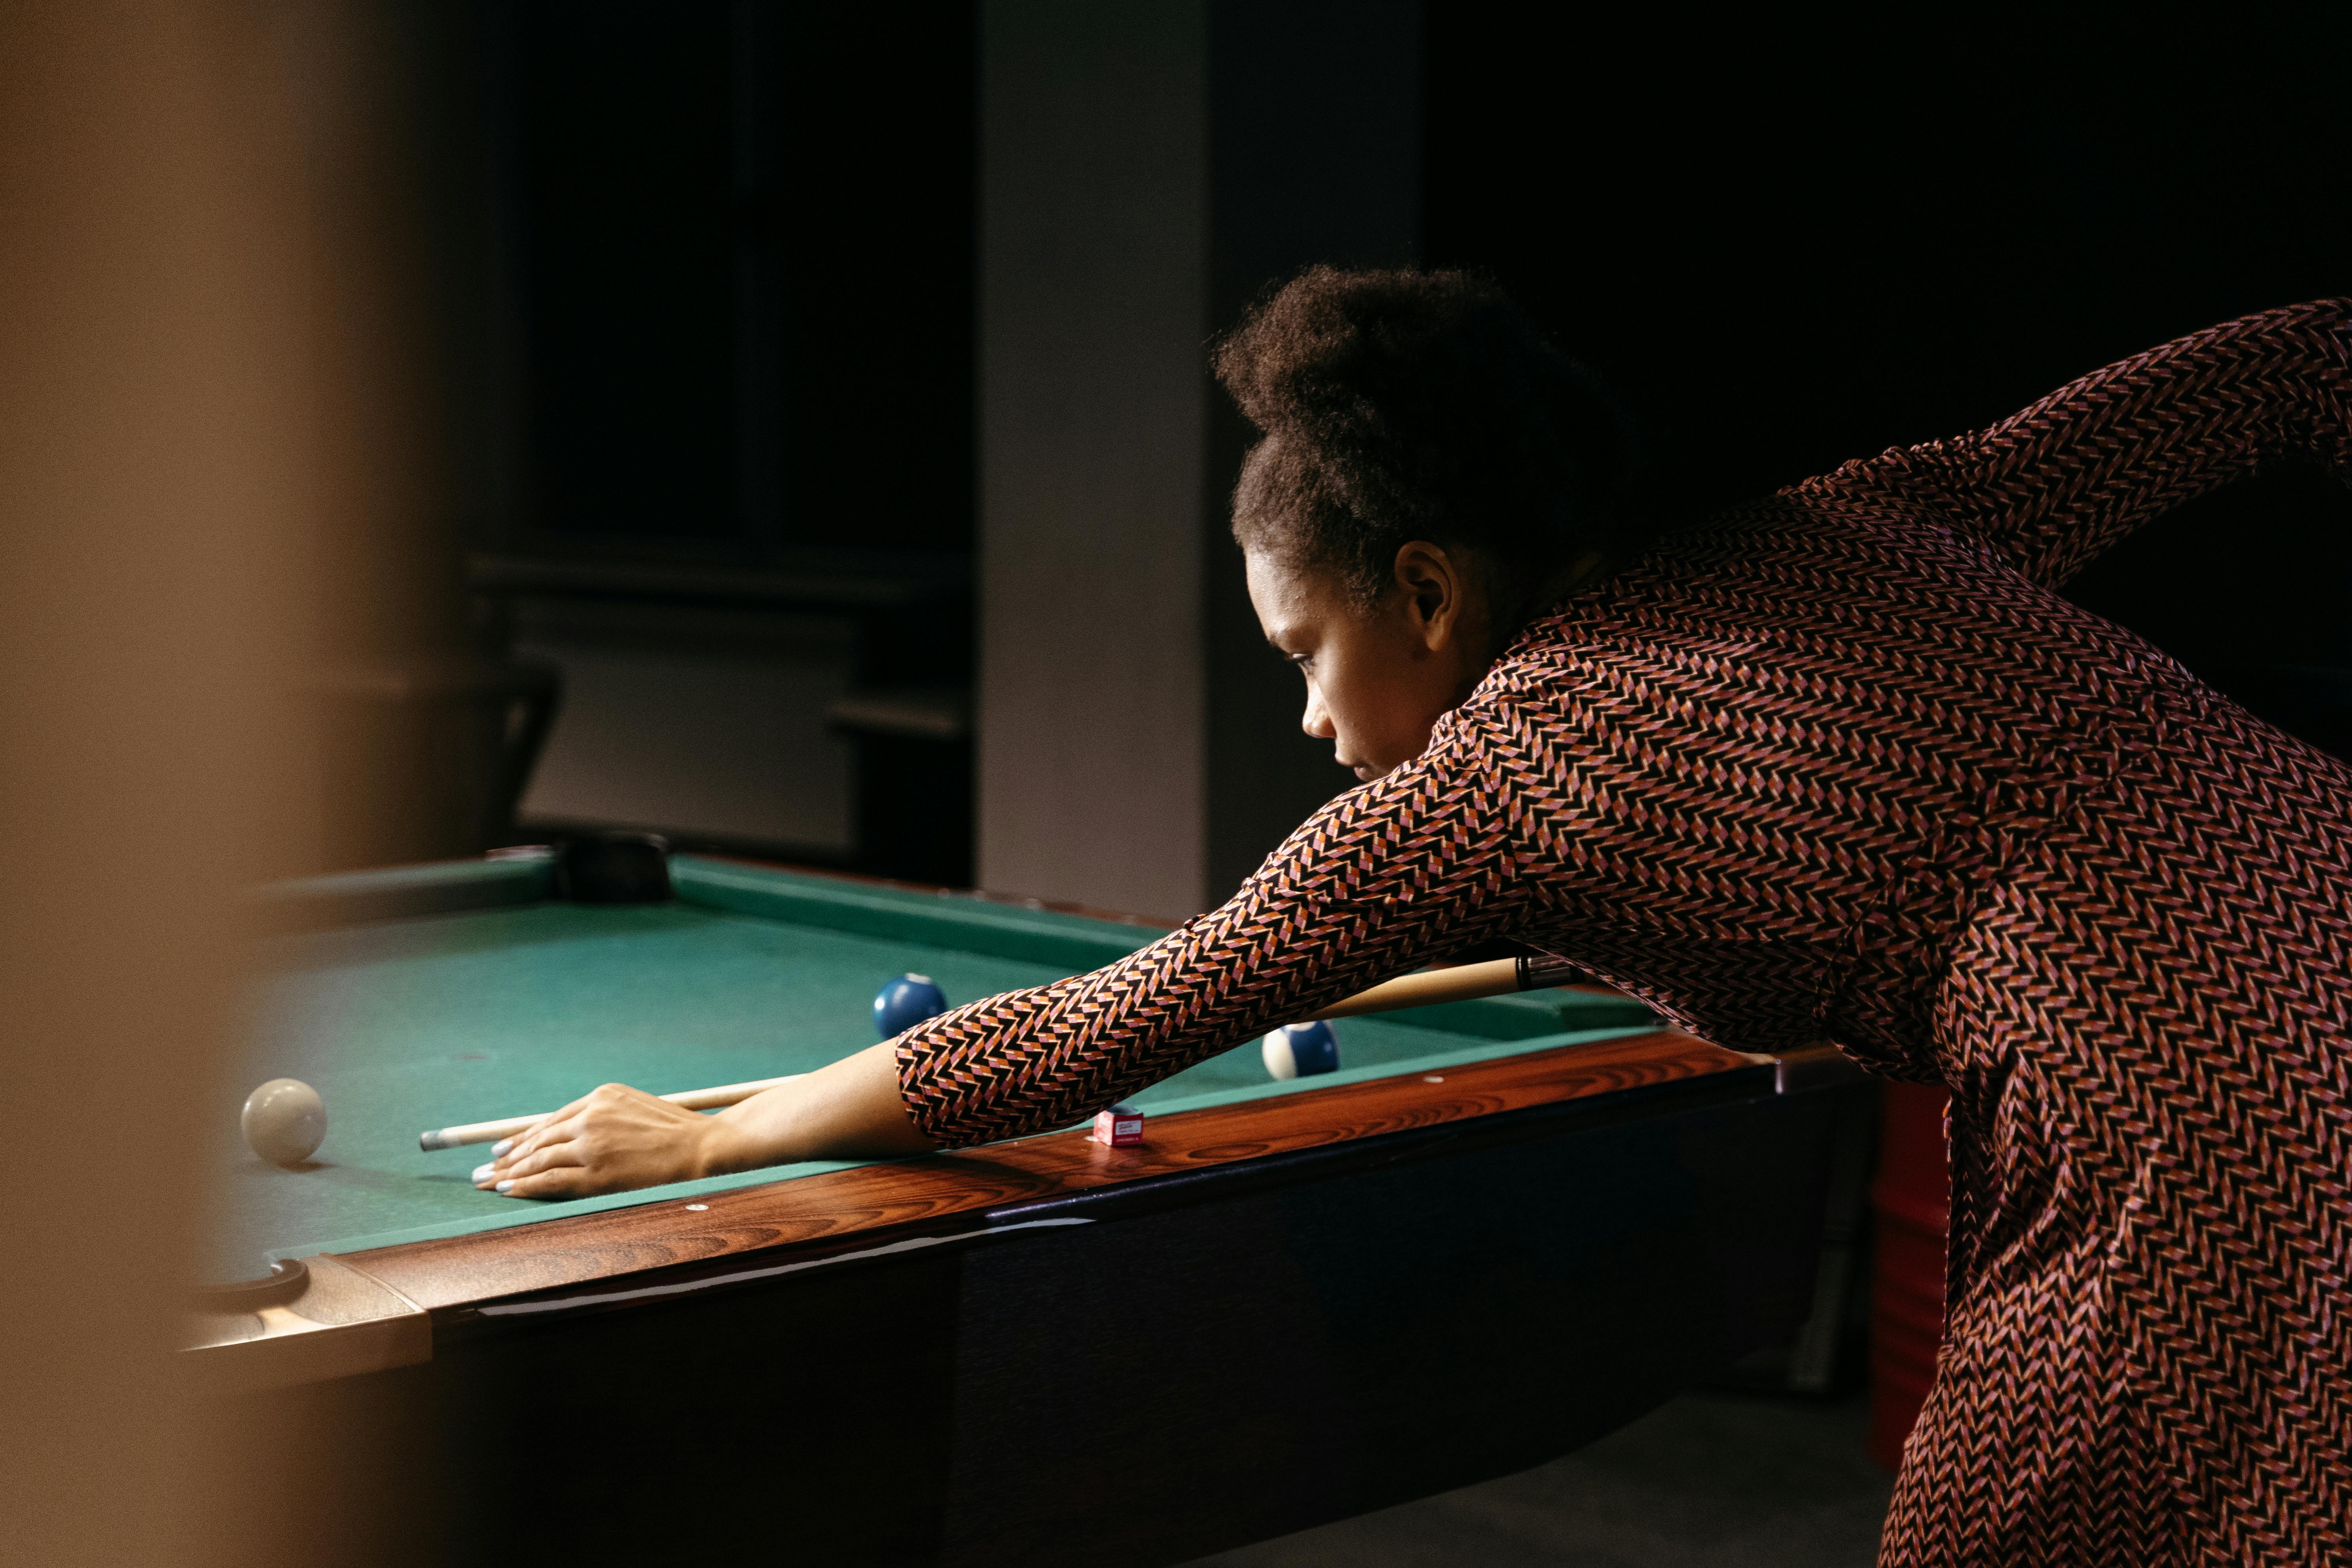 photo of a woman playing billiards